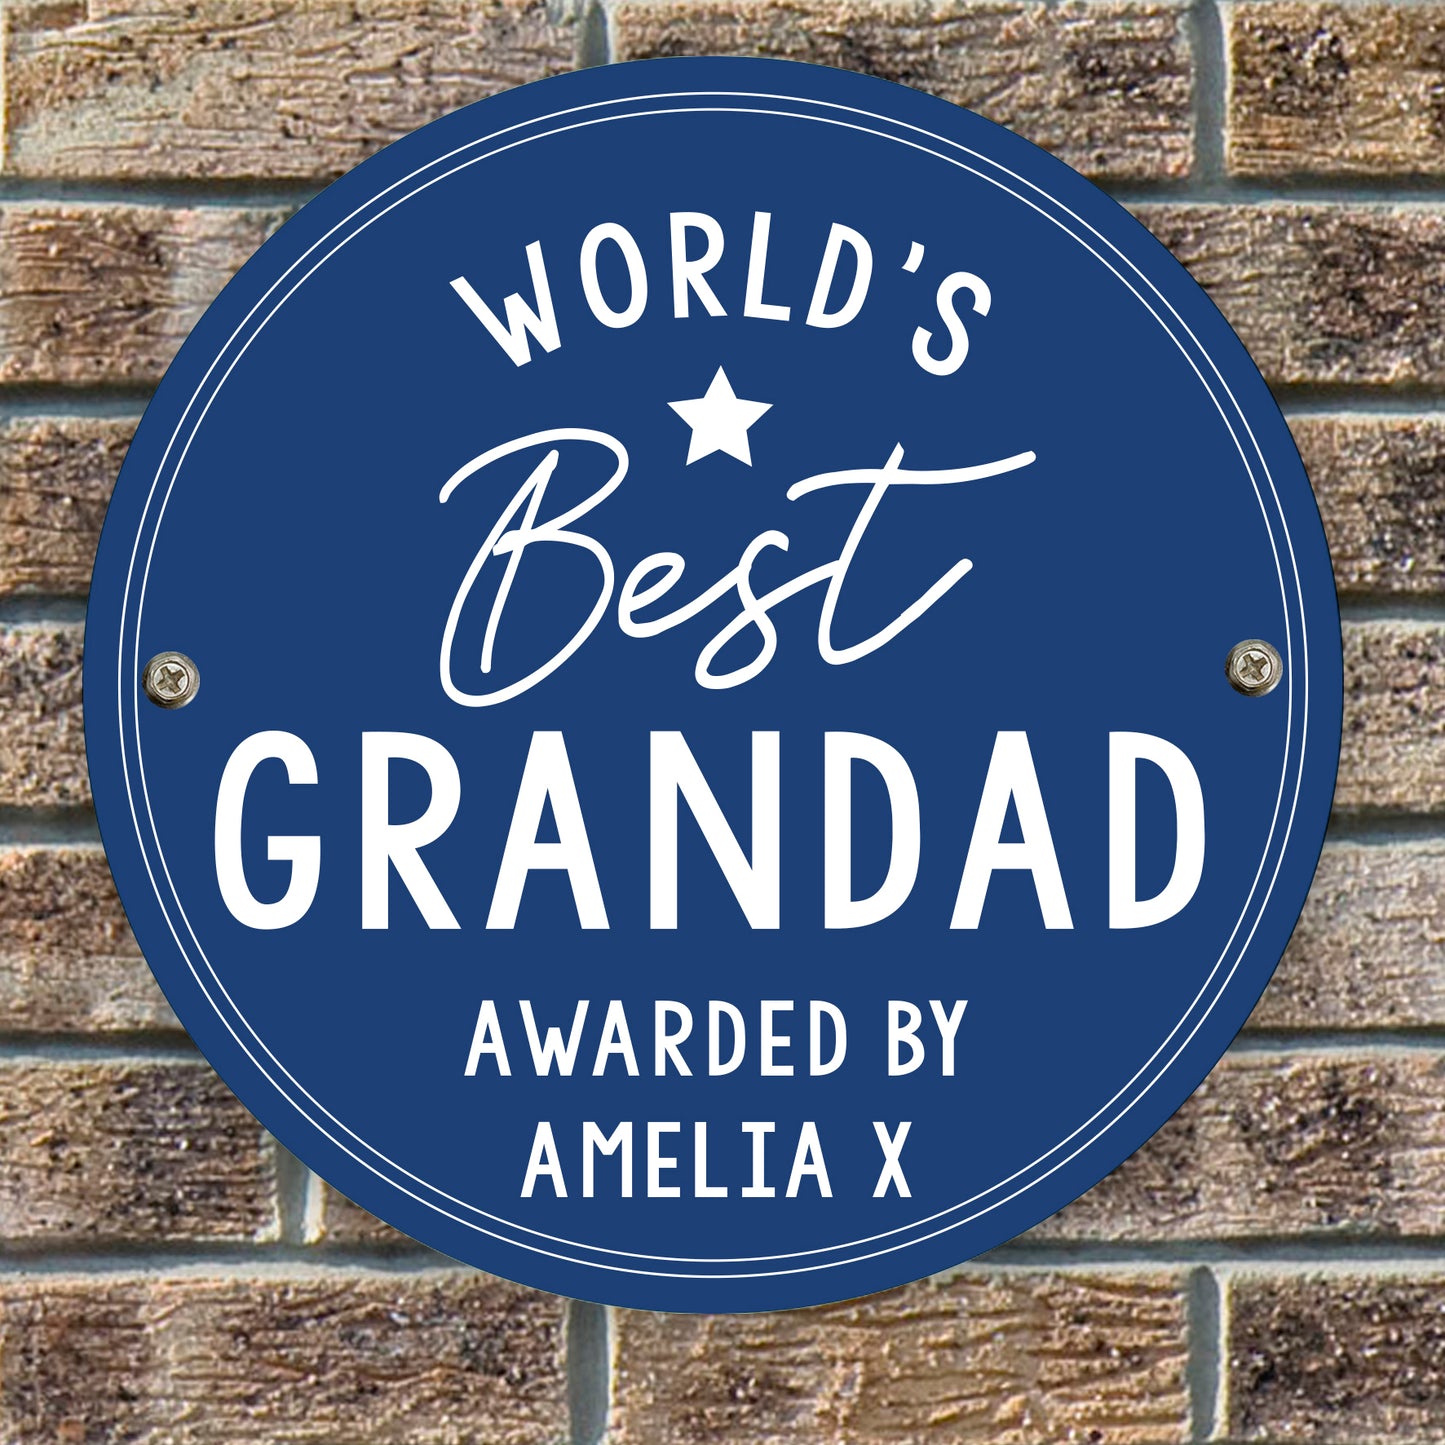 Personalised 'Worlds Best' Blue Plaque Sign | Gift For Dad | Daddy